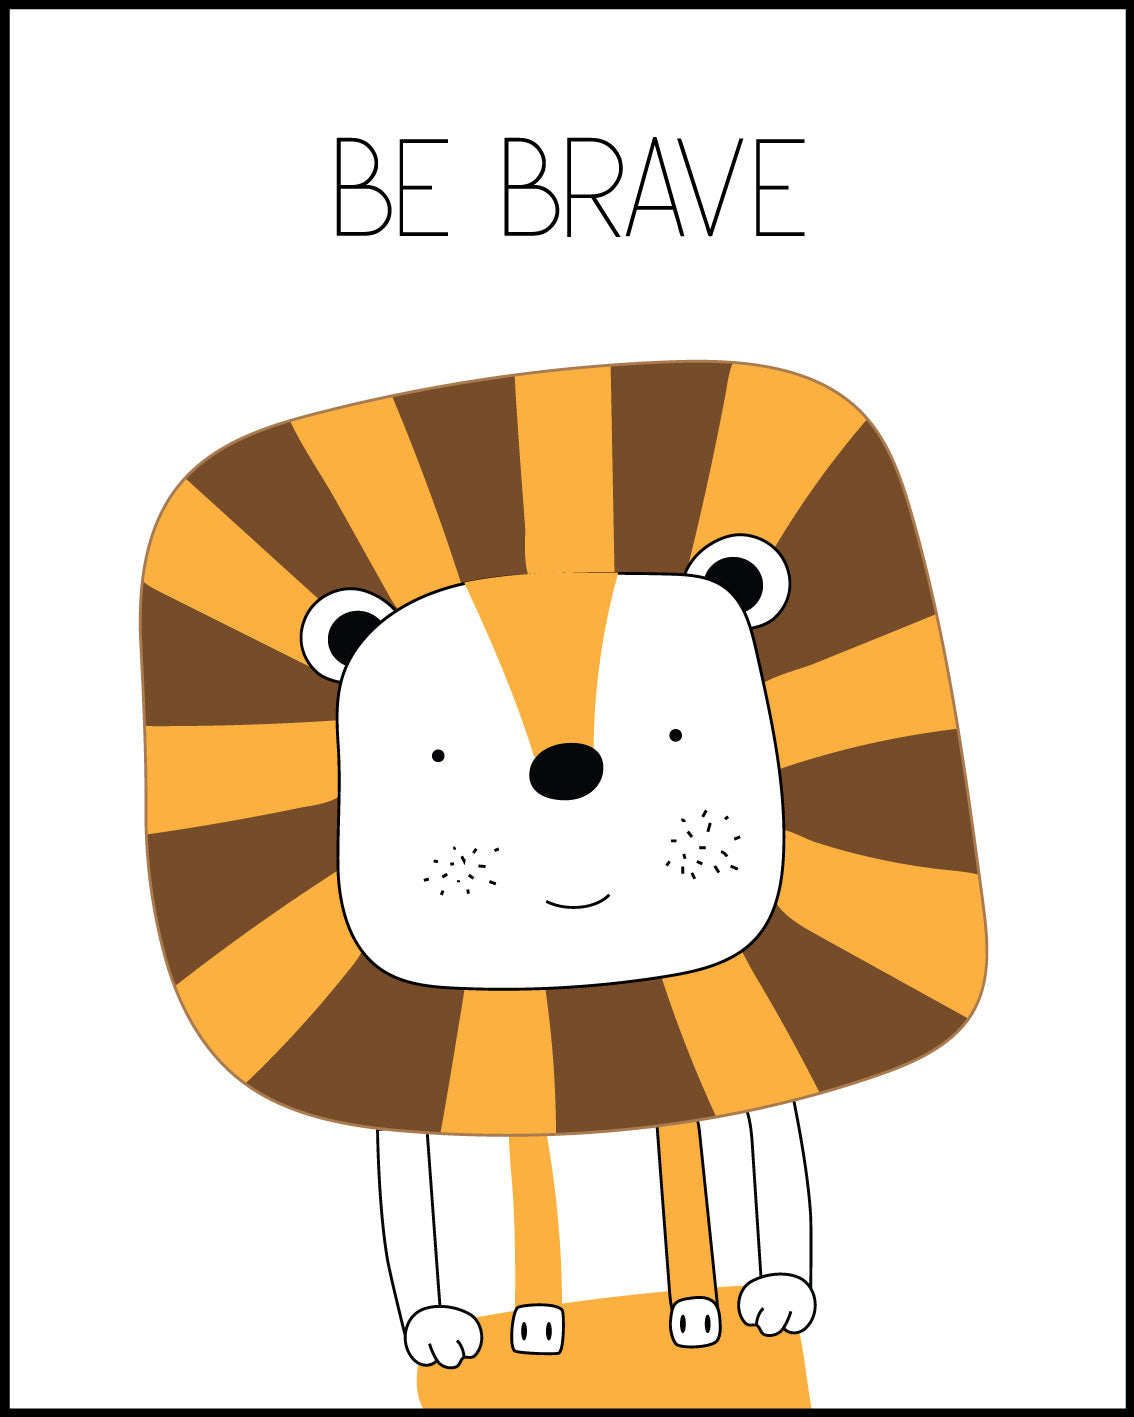 Be brave be kind be unique be yourself, set of 4 nursery Posters